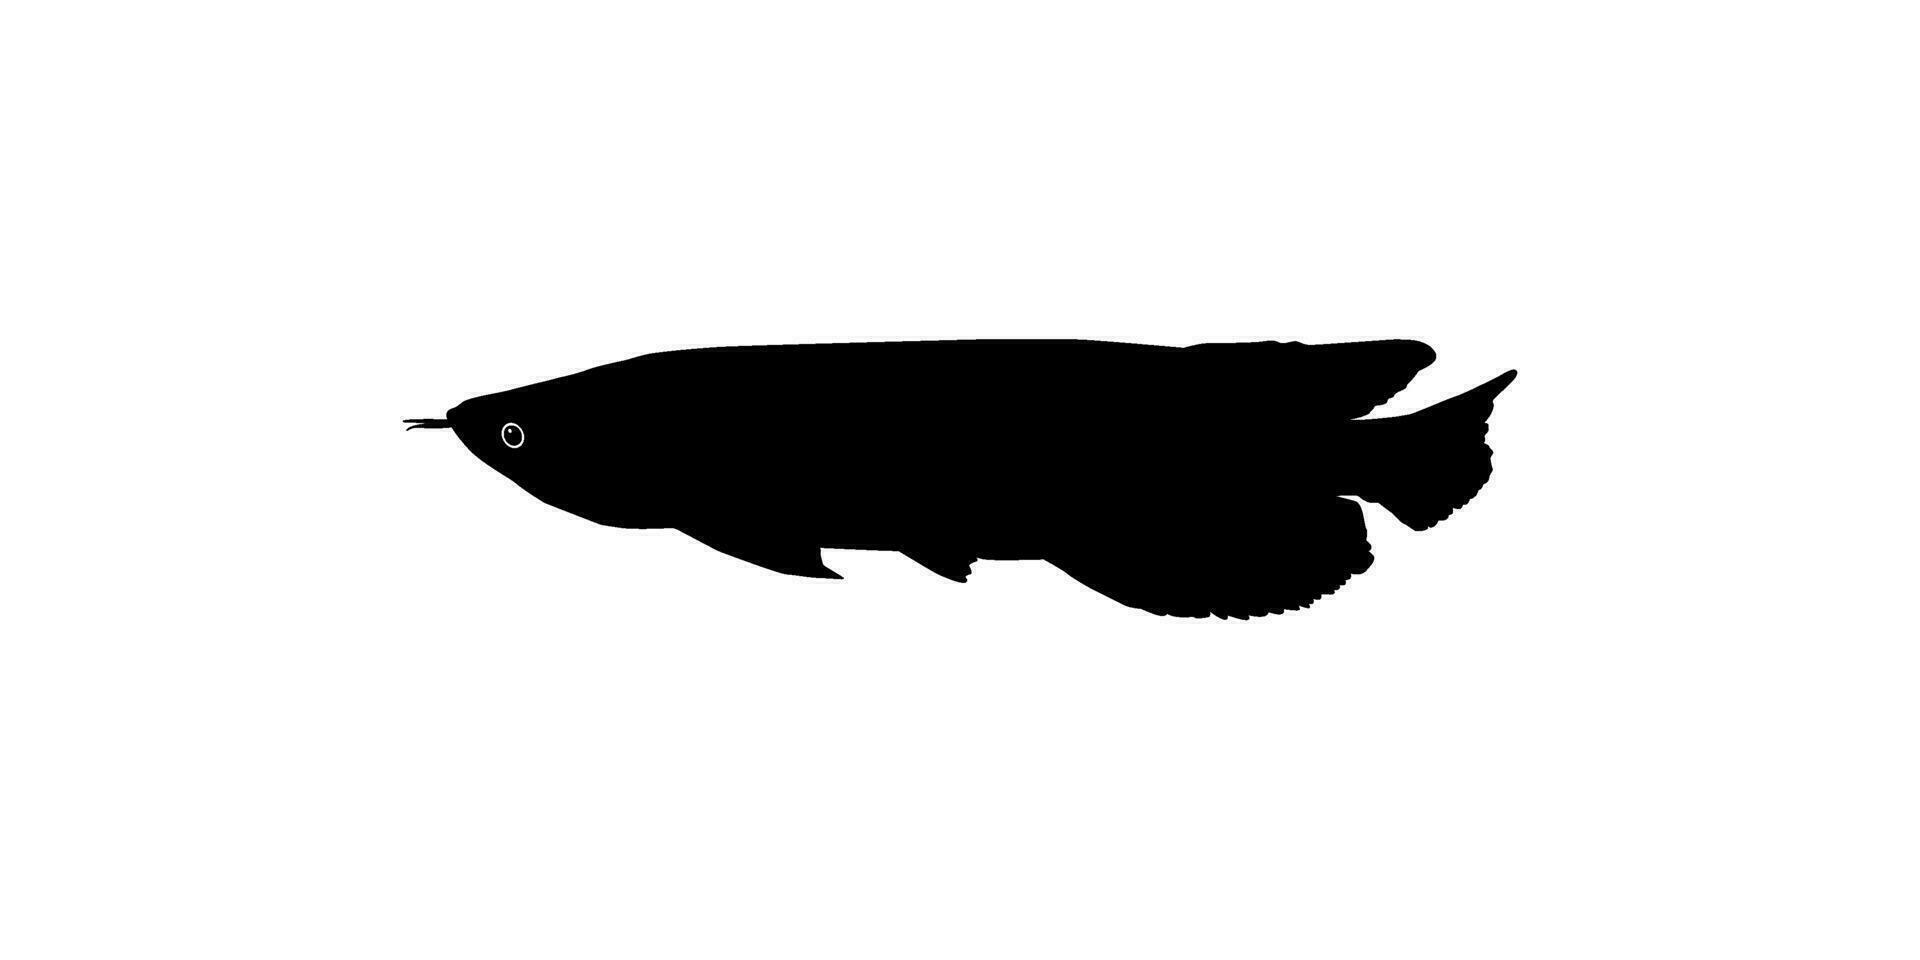 Silhouette of the Arowana or Arwana also known as Dragon Fish, for Art Illustration, Logo Type, Pictogram, Website or Graphic Design Element. Vector Illustration